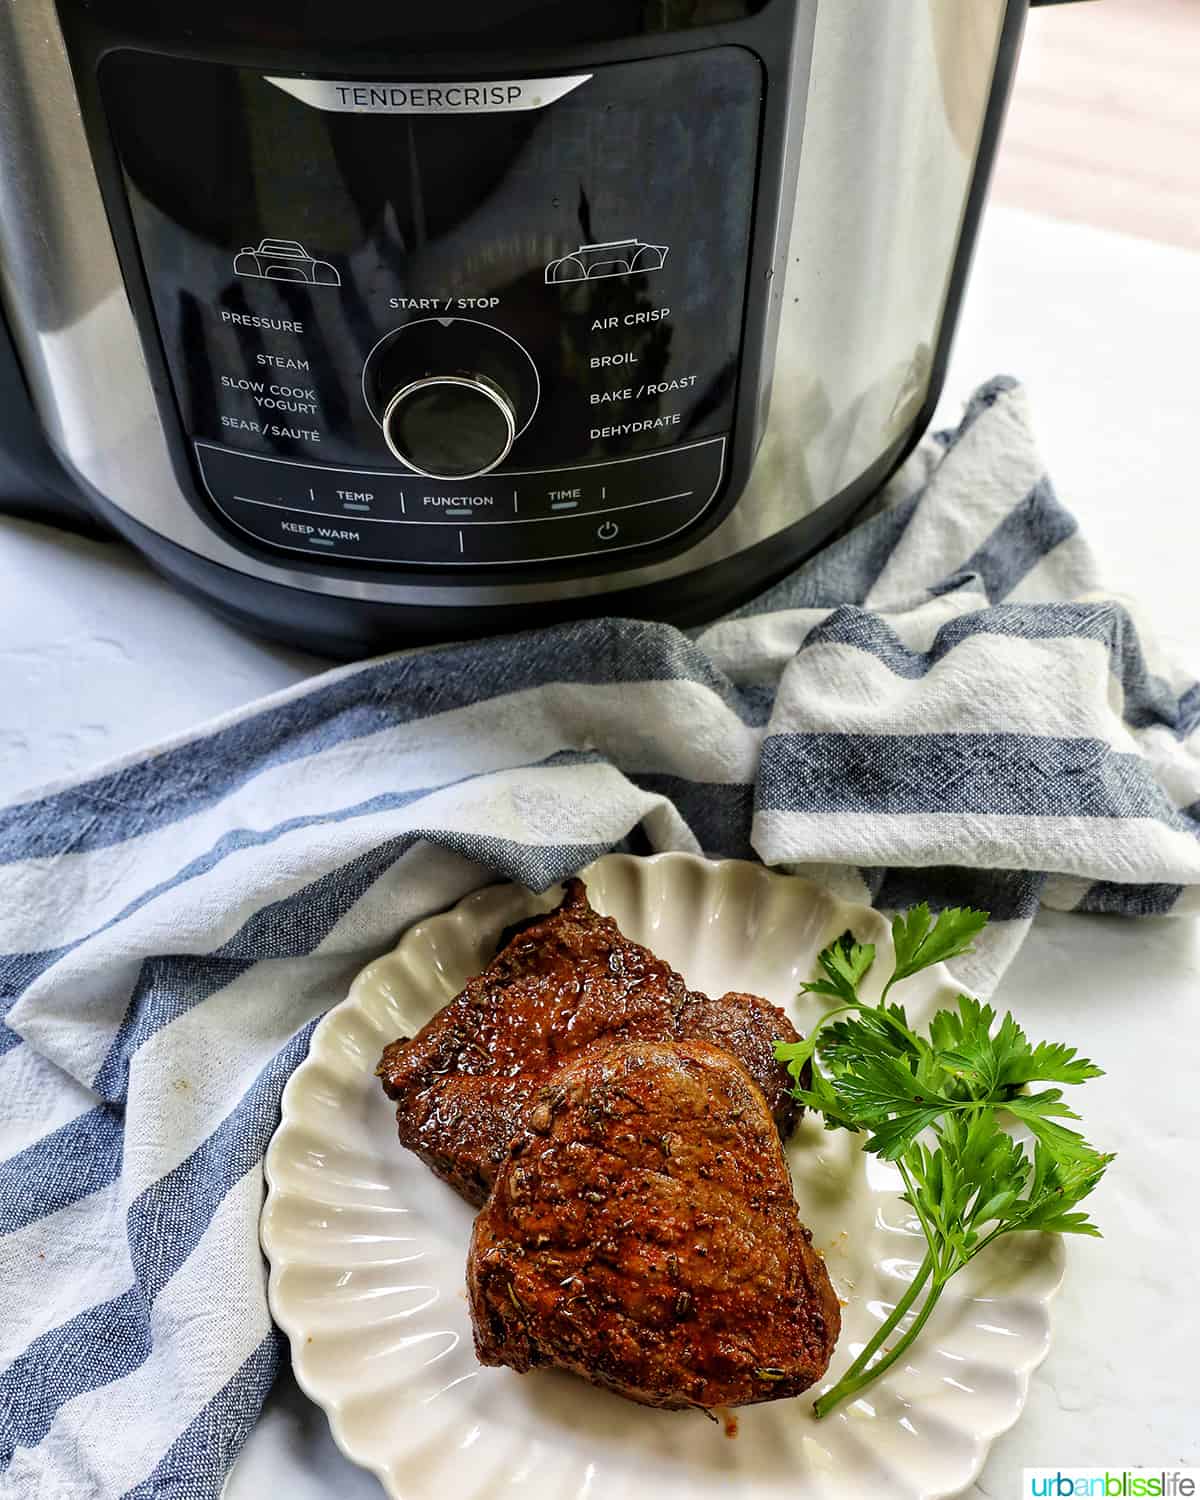 two filet mignons on a plate in front of an air fryer.